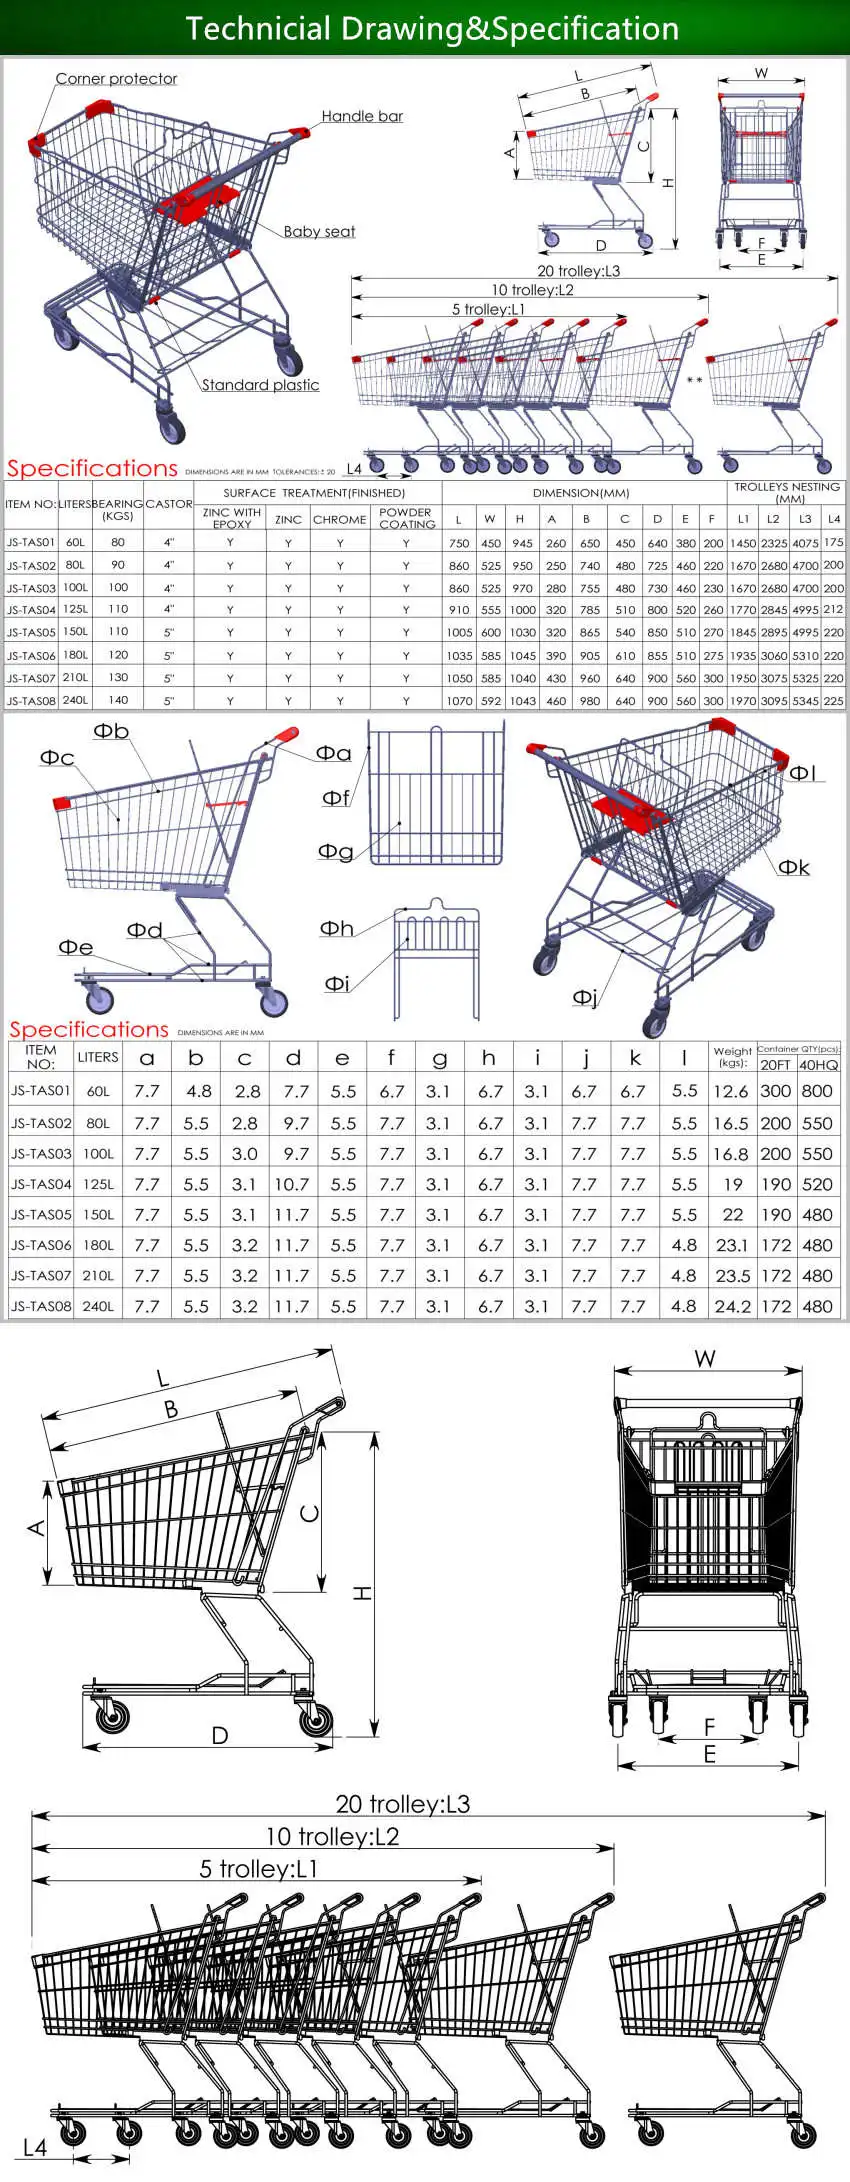 JQWGYGWC Two-Wheeled Folding Shopping cart Supermarket Shopping cart Portable Three-Wheeled Chair trolleys trolleys Elderly People Shopping carts 